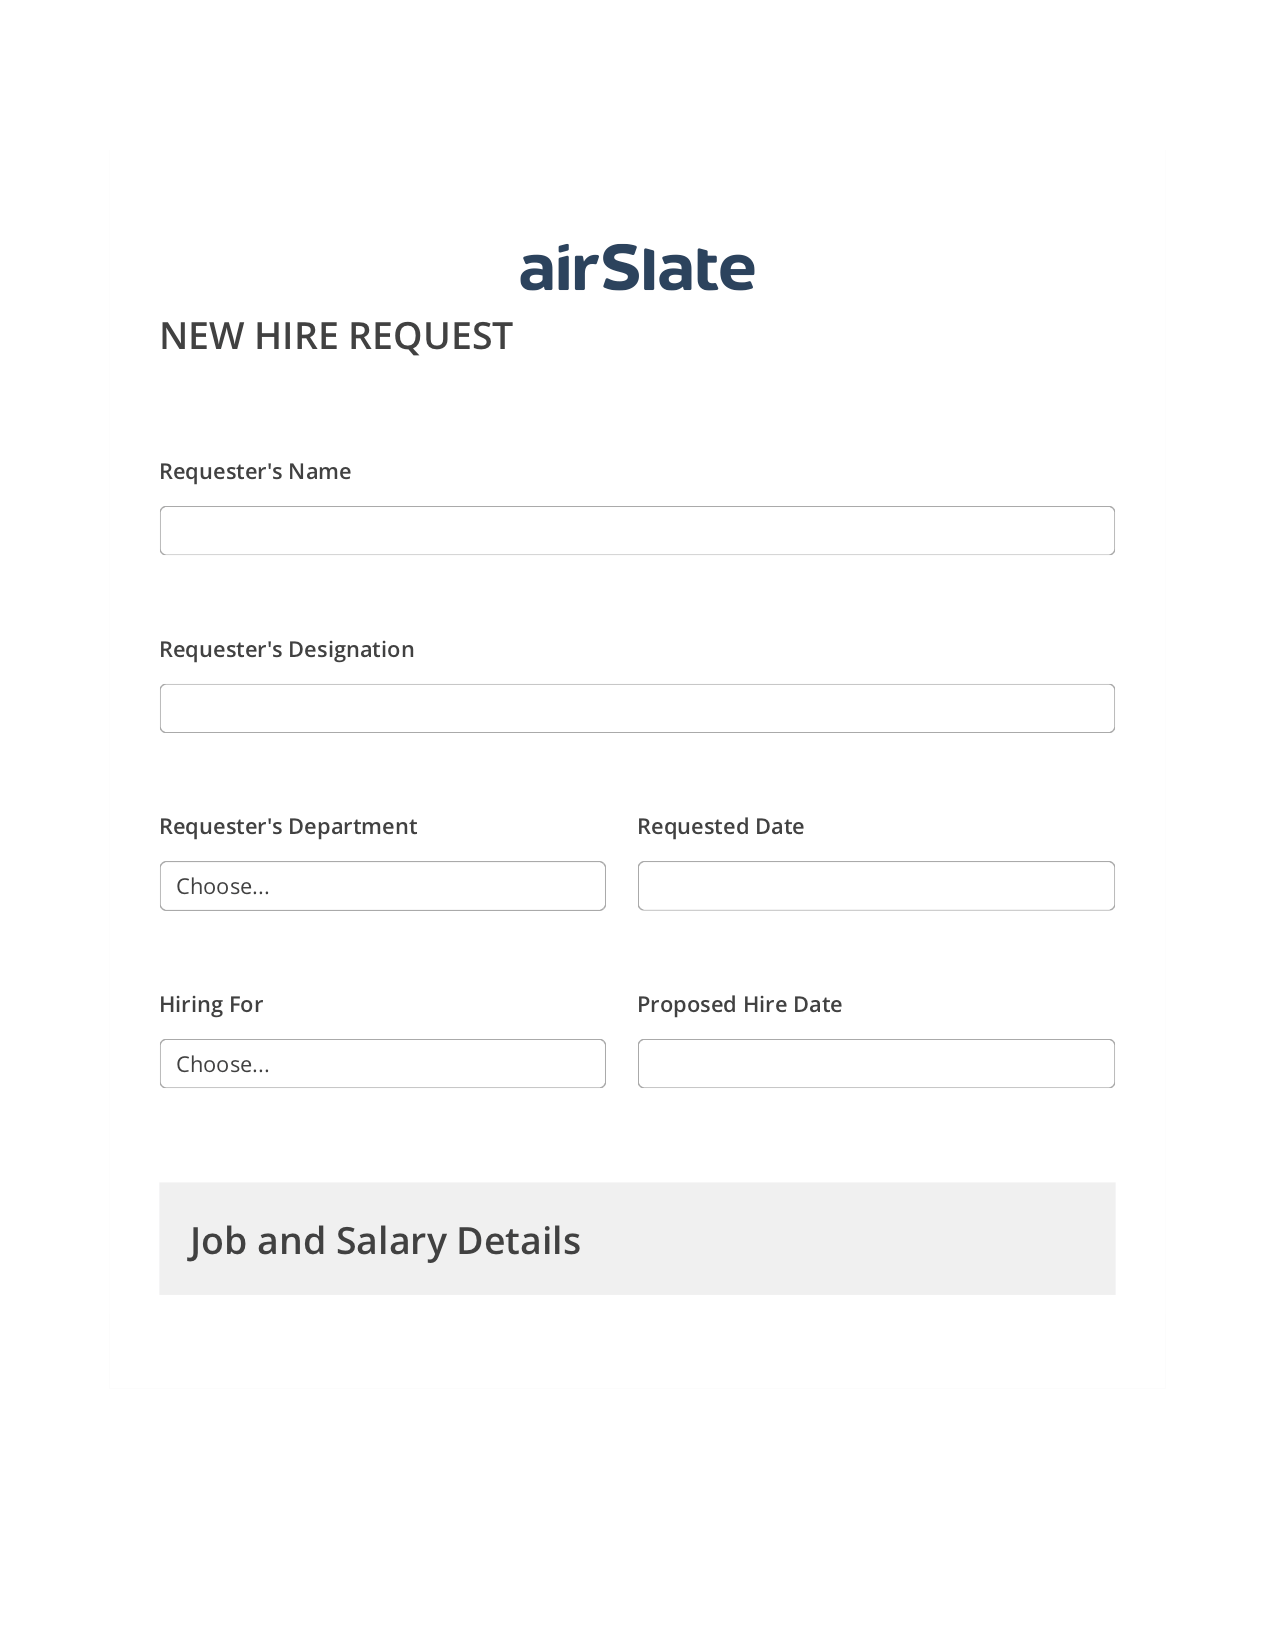 Hiring Request Workflow Prefill from NetSuite records, Send a Slate with Roles Bot, Export to Excel 365 Bot